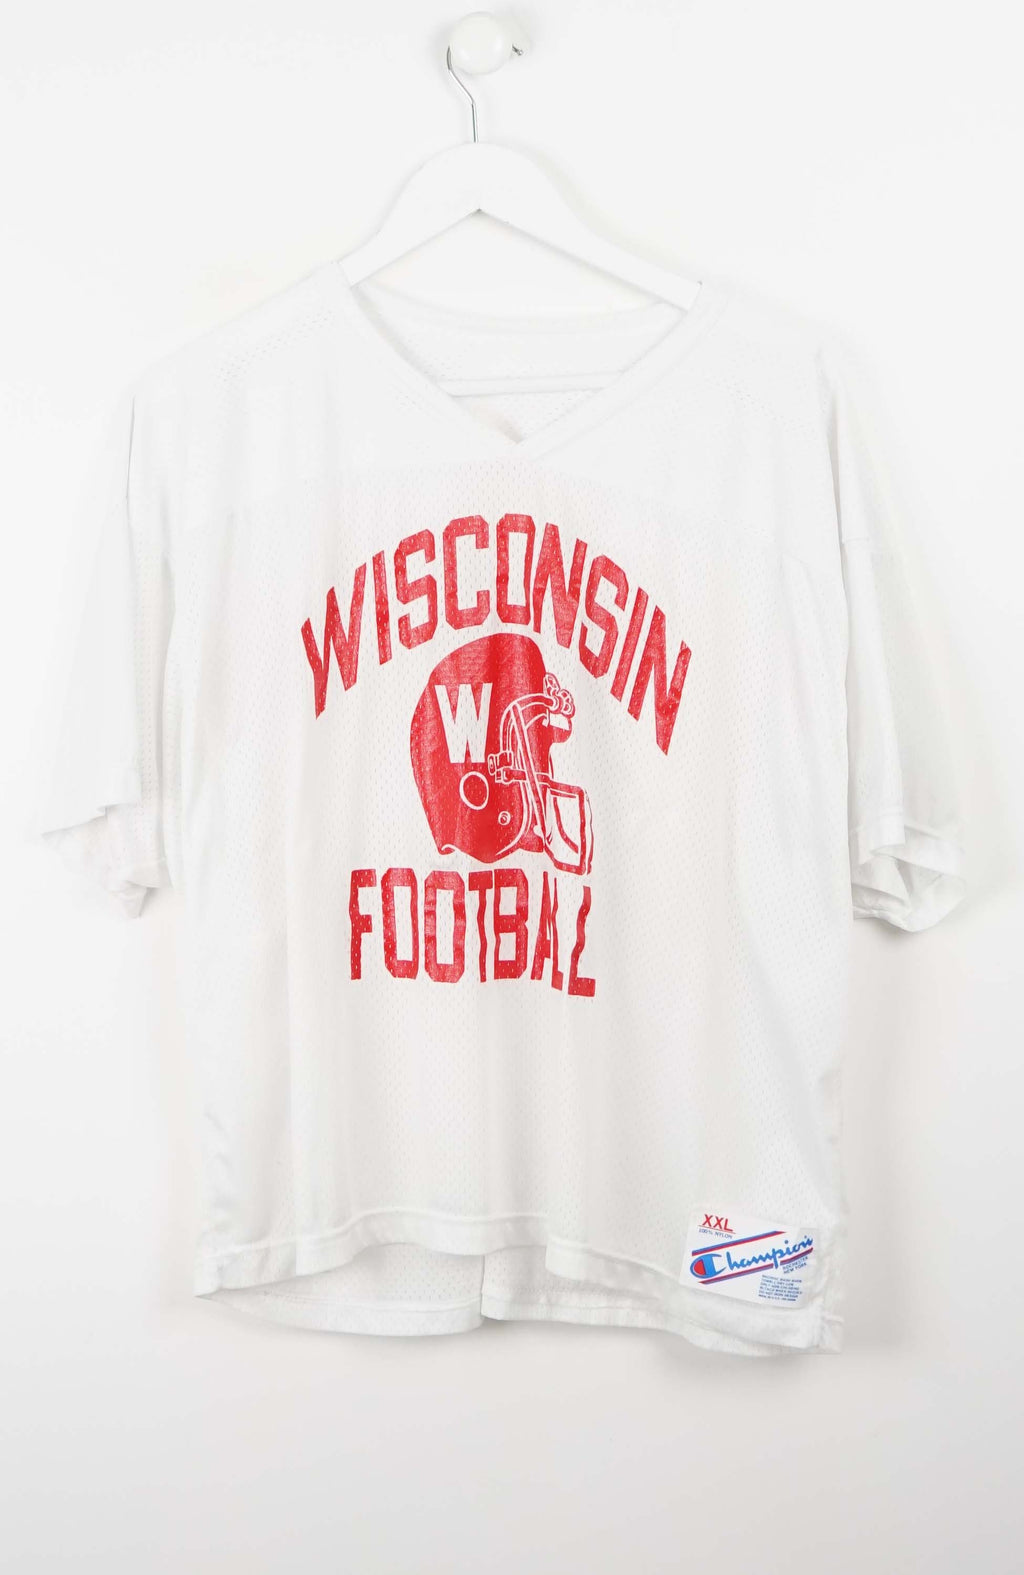 VINTAGE NFL WISCONSIN FOOTBALL CROPPED JERSEY (XXL) 